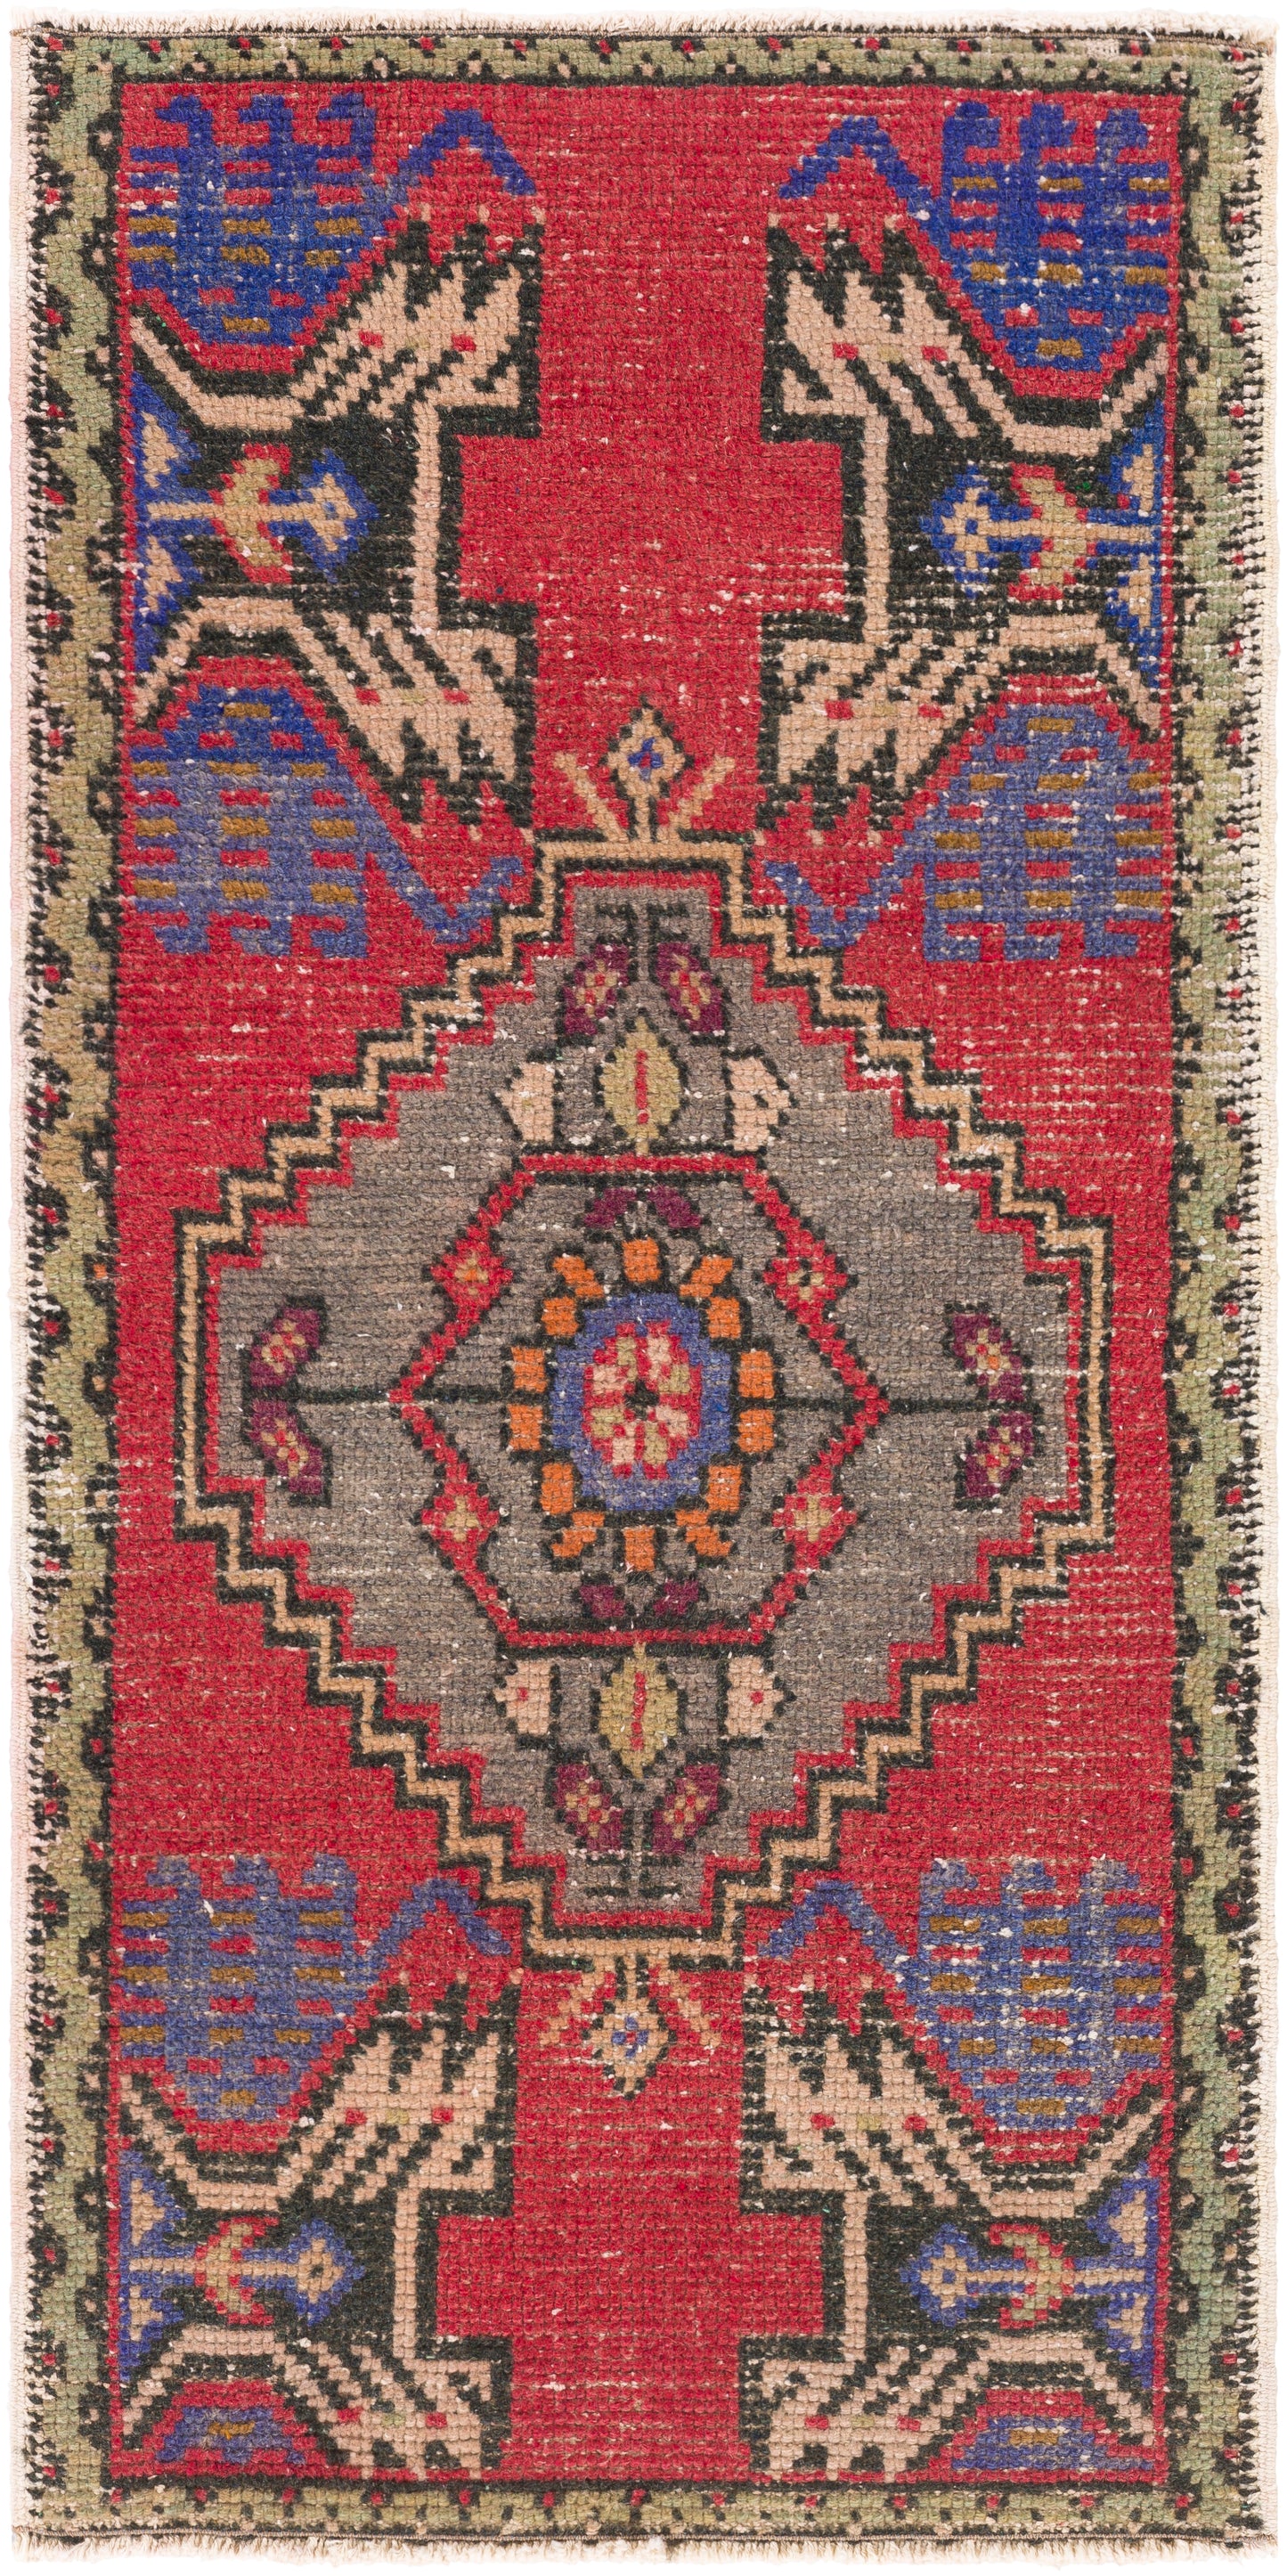 Antique One of a Kind 27513 Hand Knotted Wool Indoor Area Rug by Surya Rugs